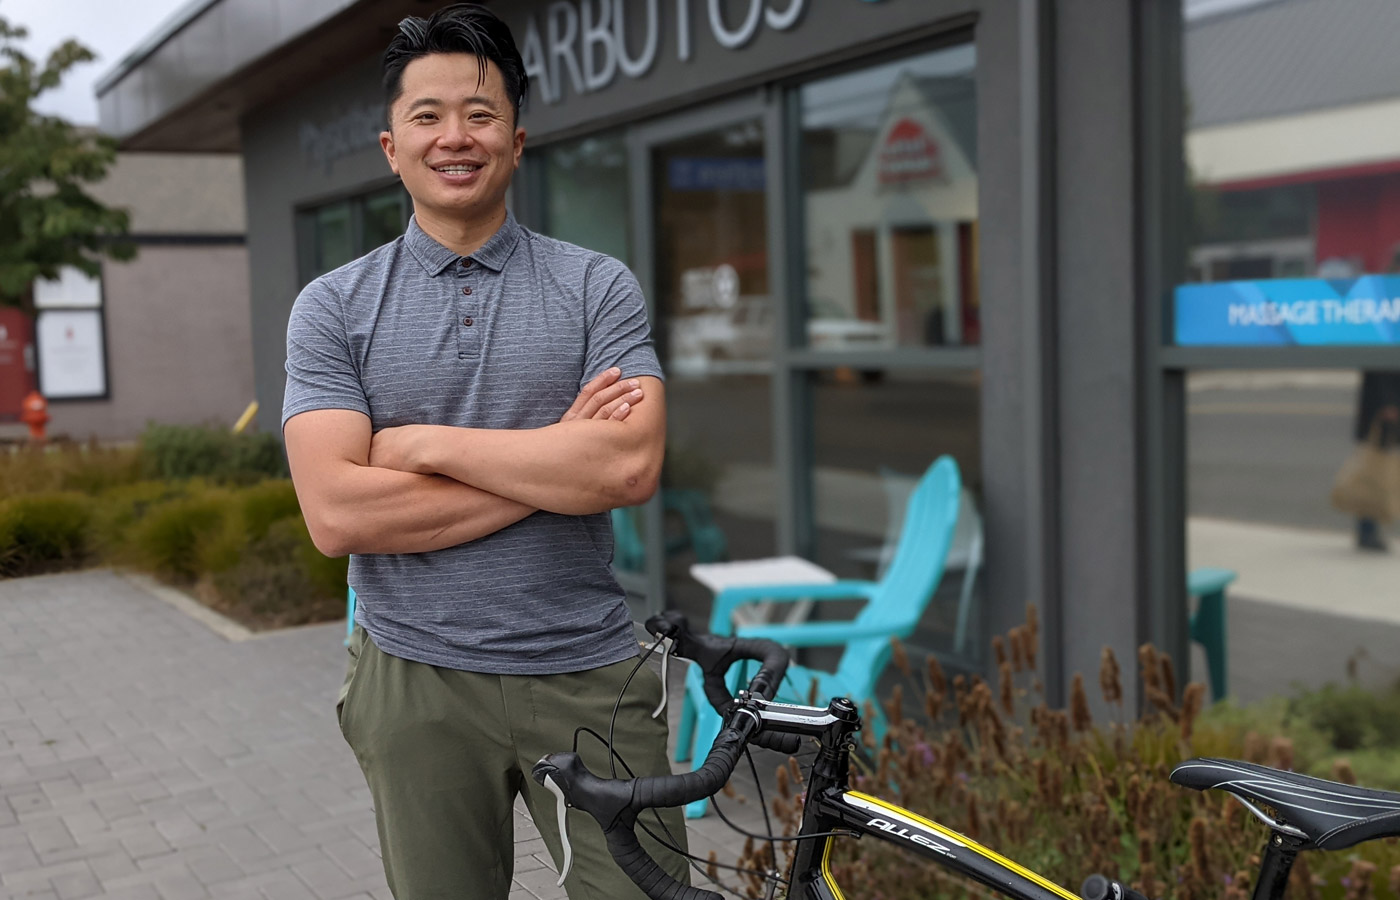 Thomas stands with his arms crossed in front of the Arbutus physio clinic, posing beside his sexy bike.